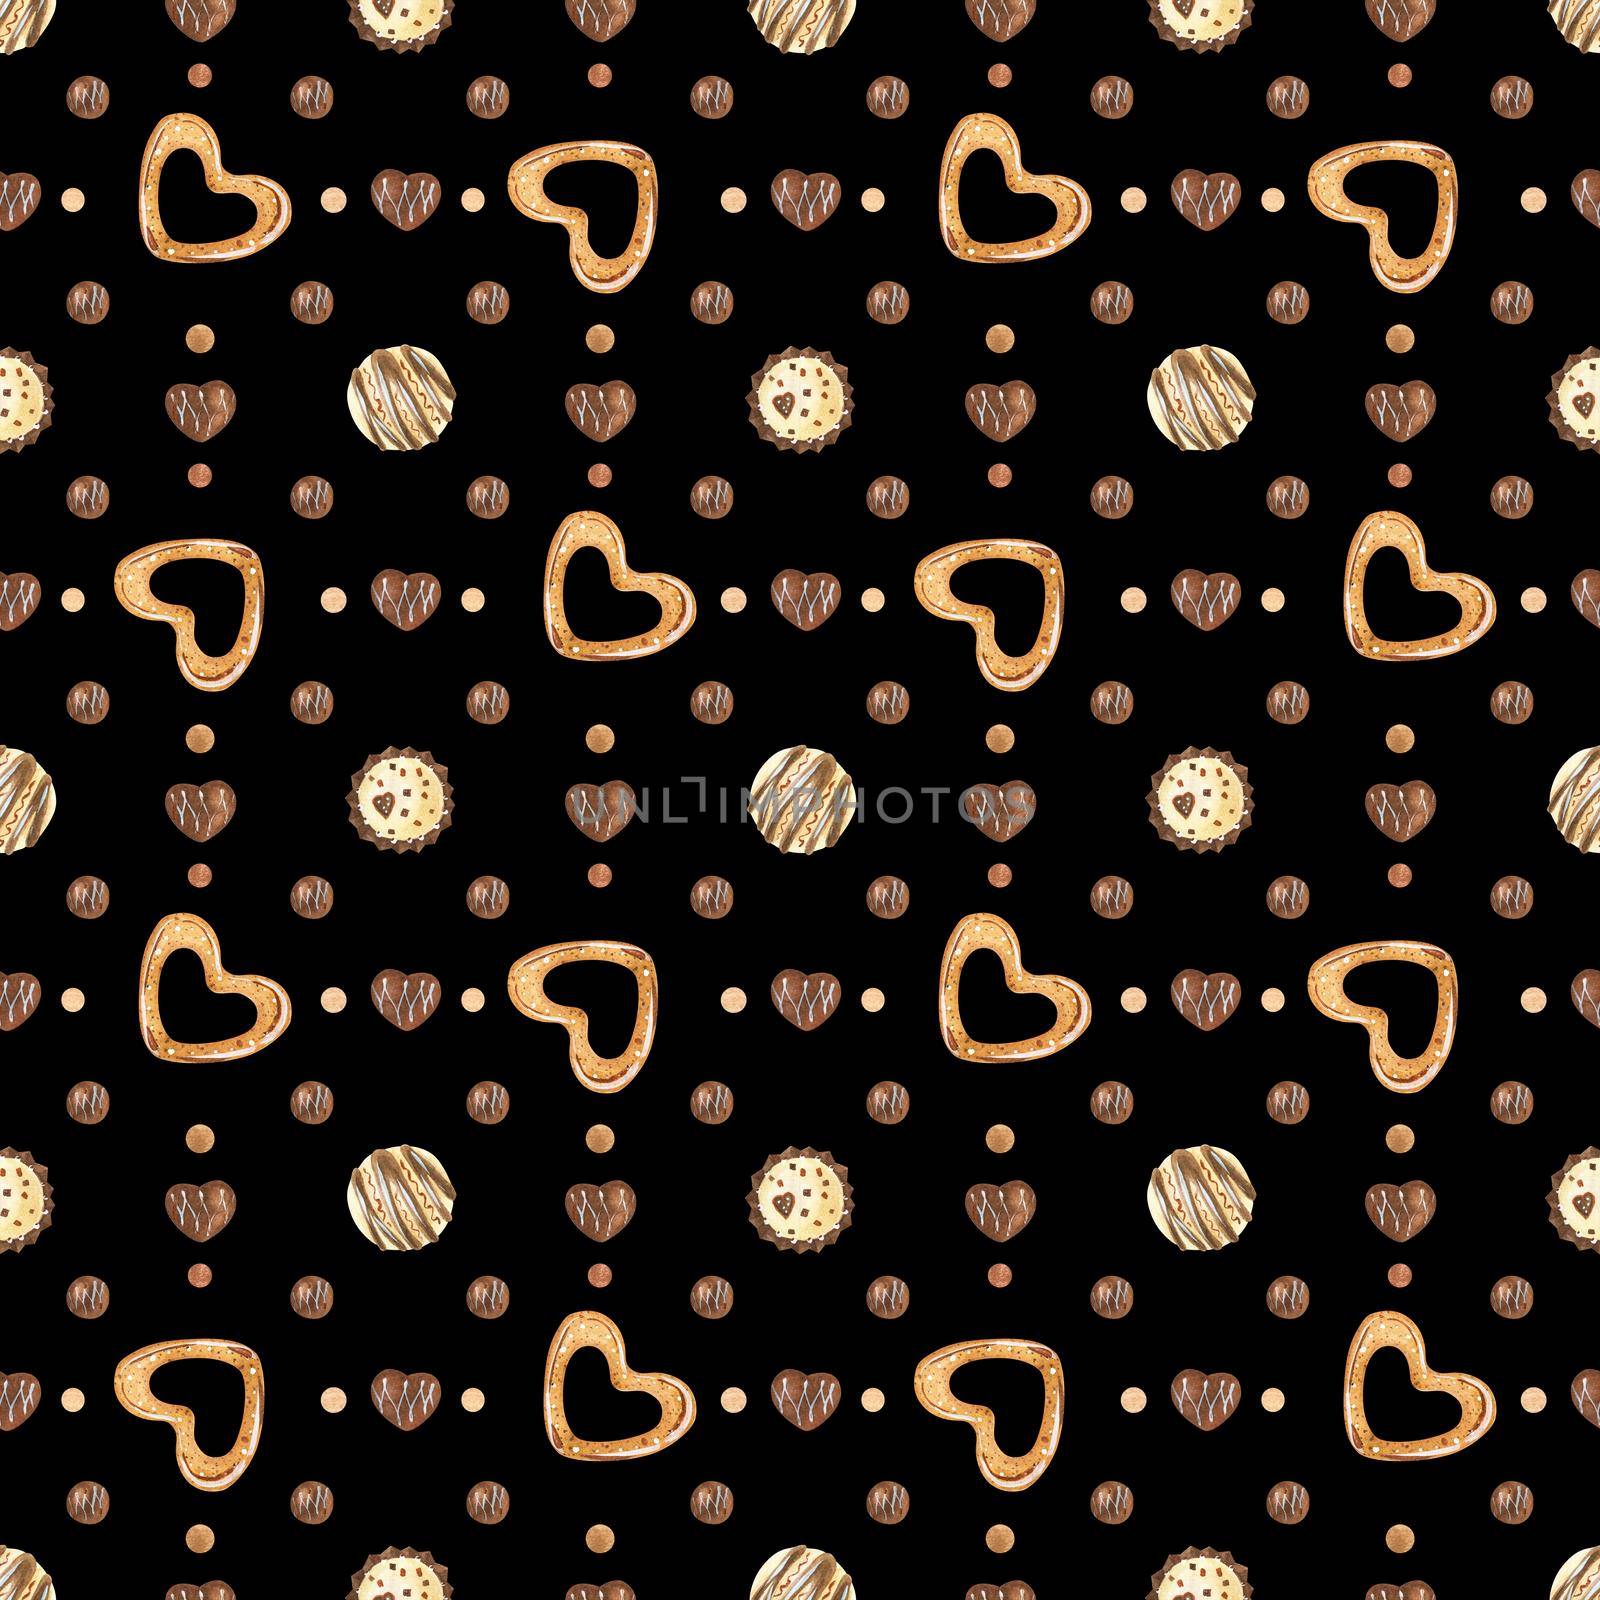 Sweet Valentine seamless pattern with chocolate candies and cookies. Watercolor illustration for any event decoration, black background, path included